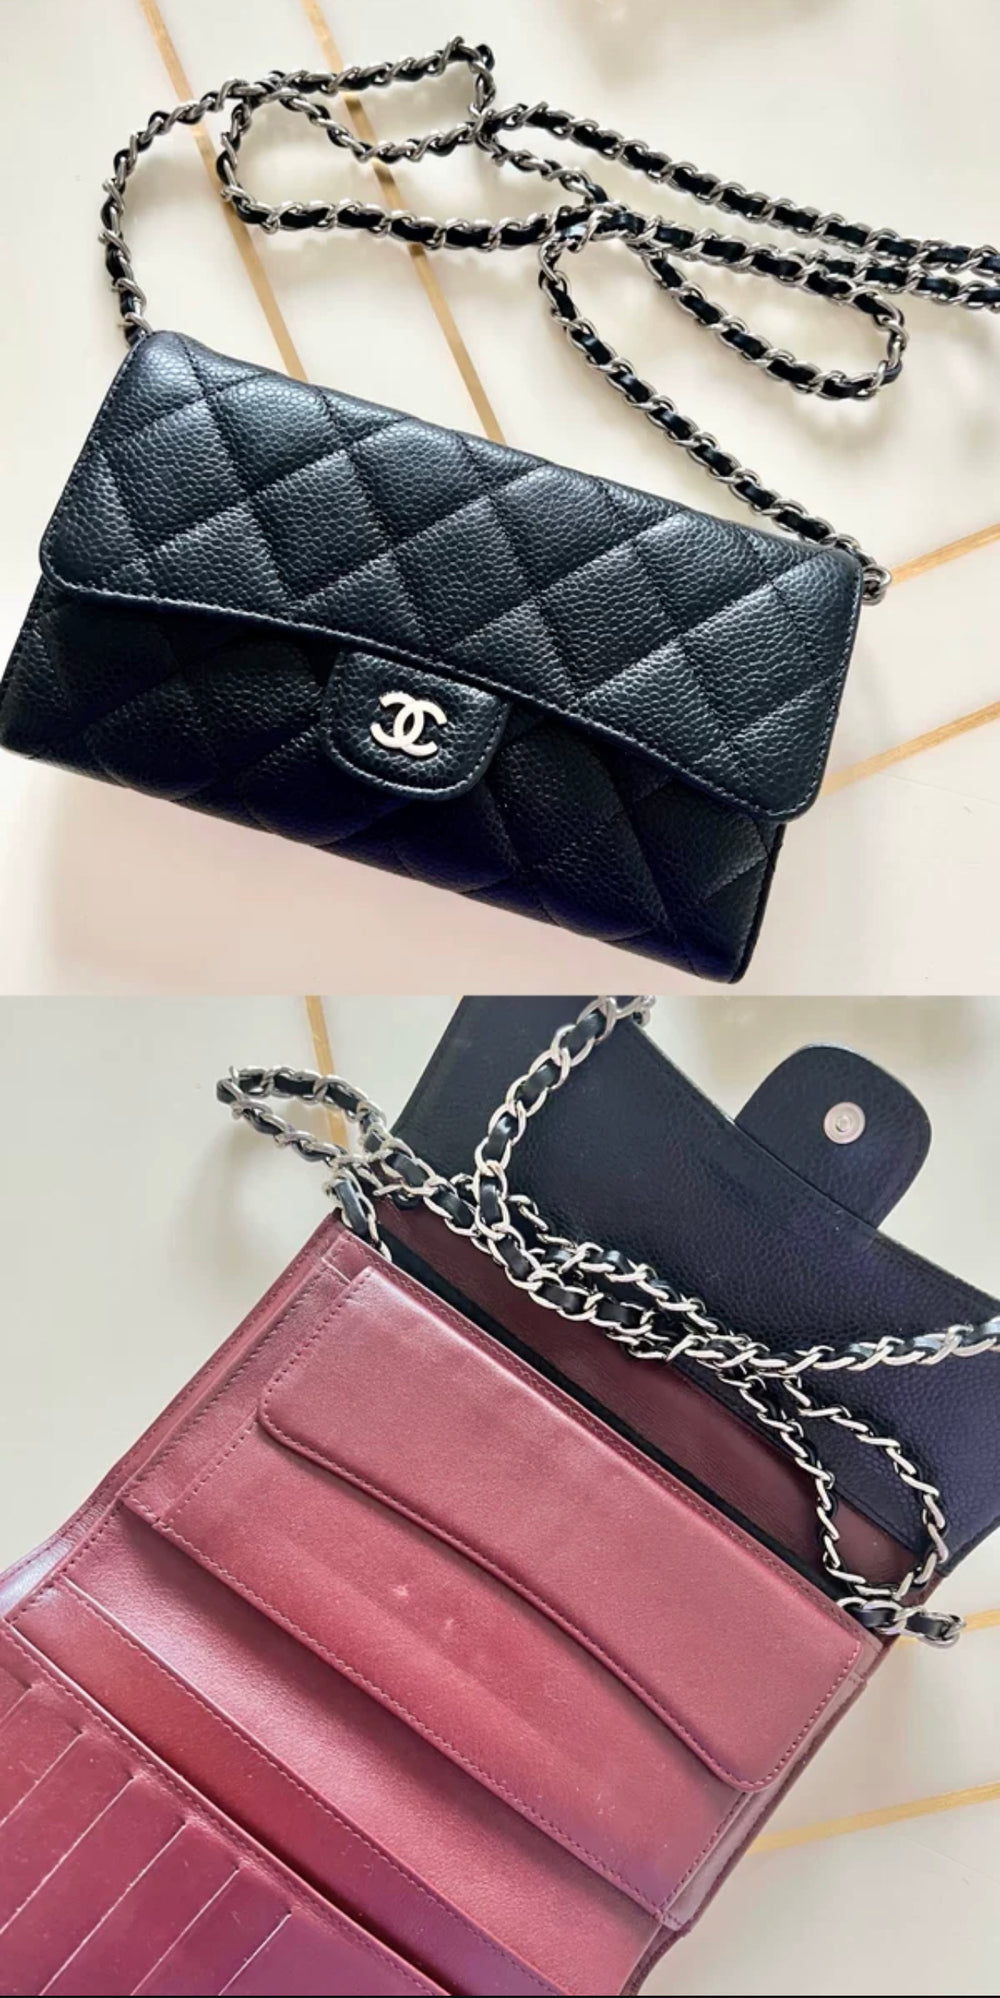 Vintage Chanel Caviar Leather Wallet - free bag strap to convert